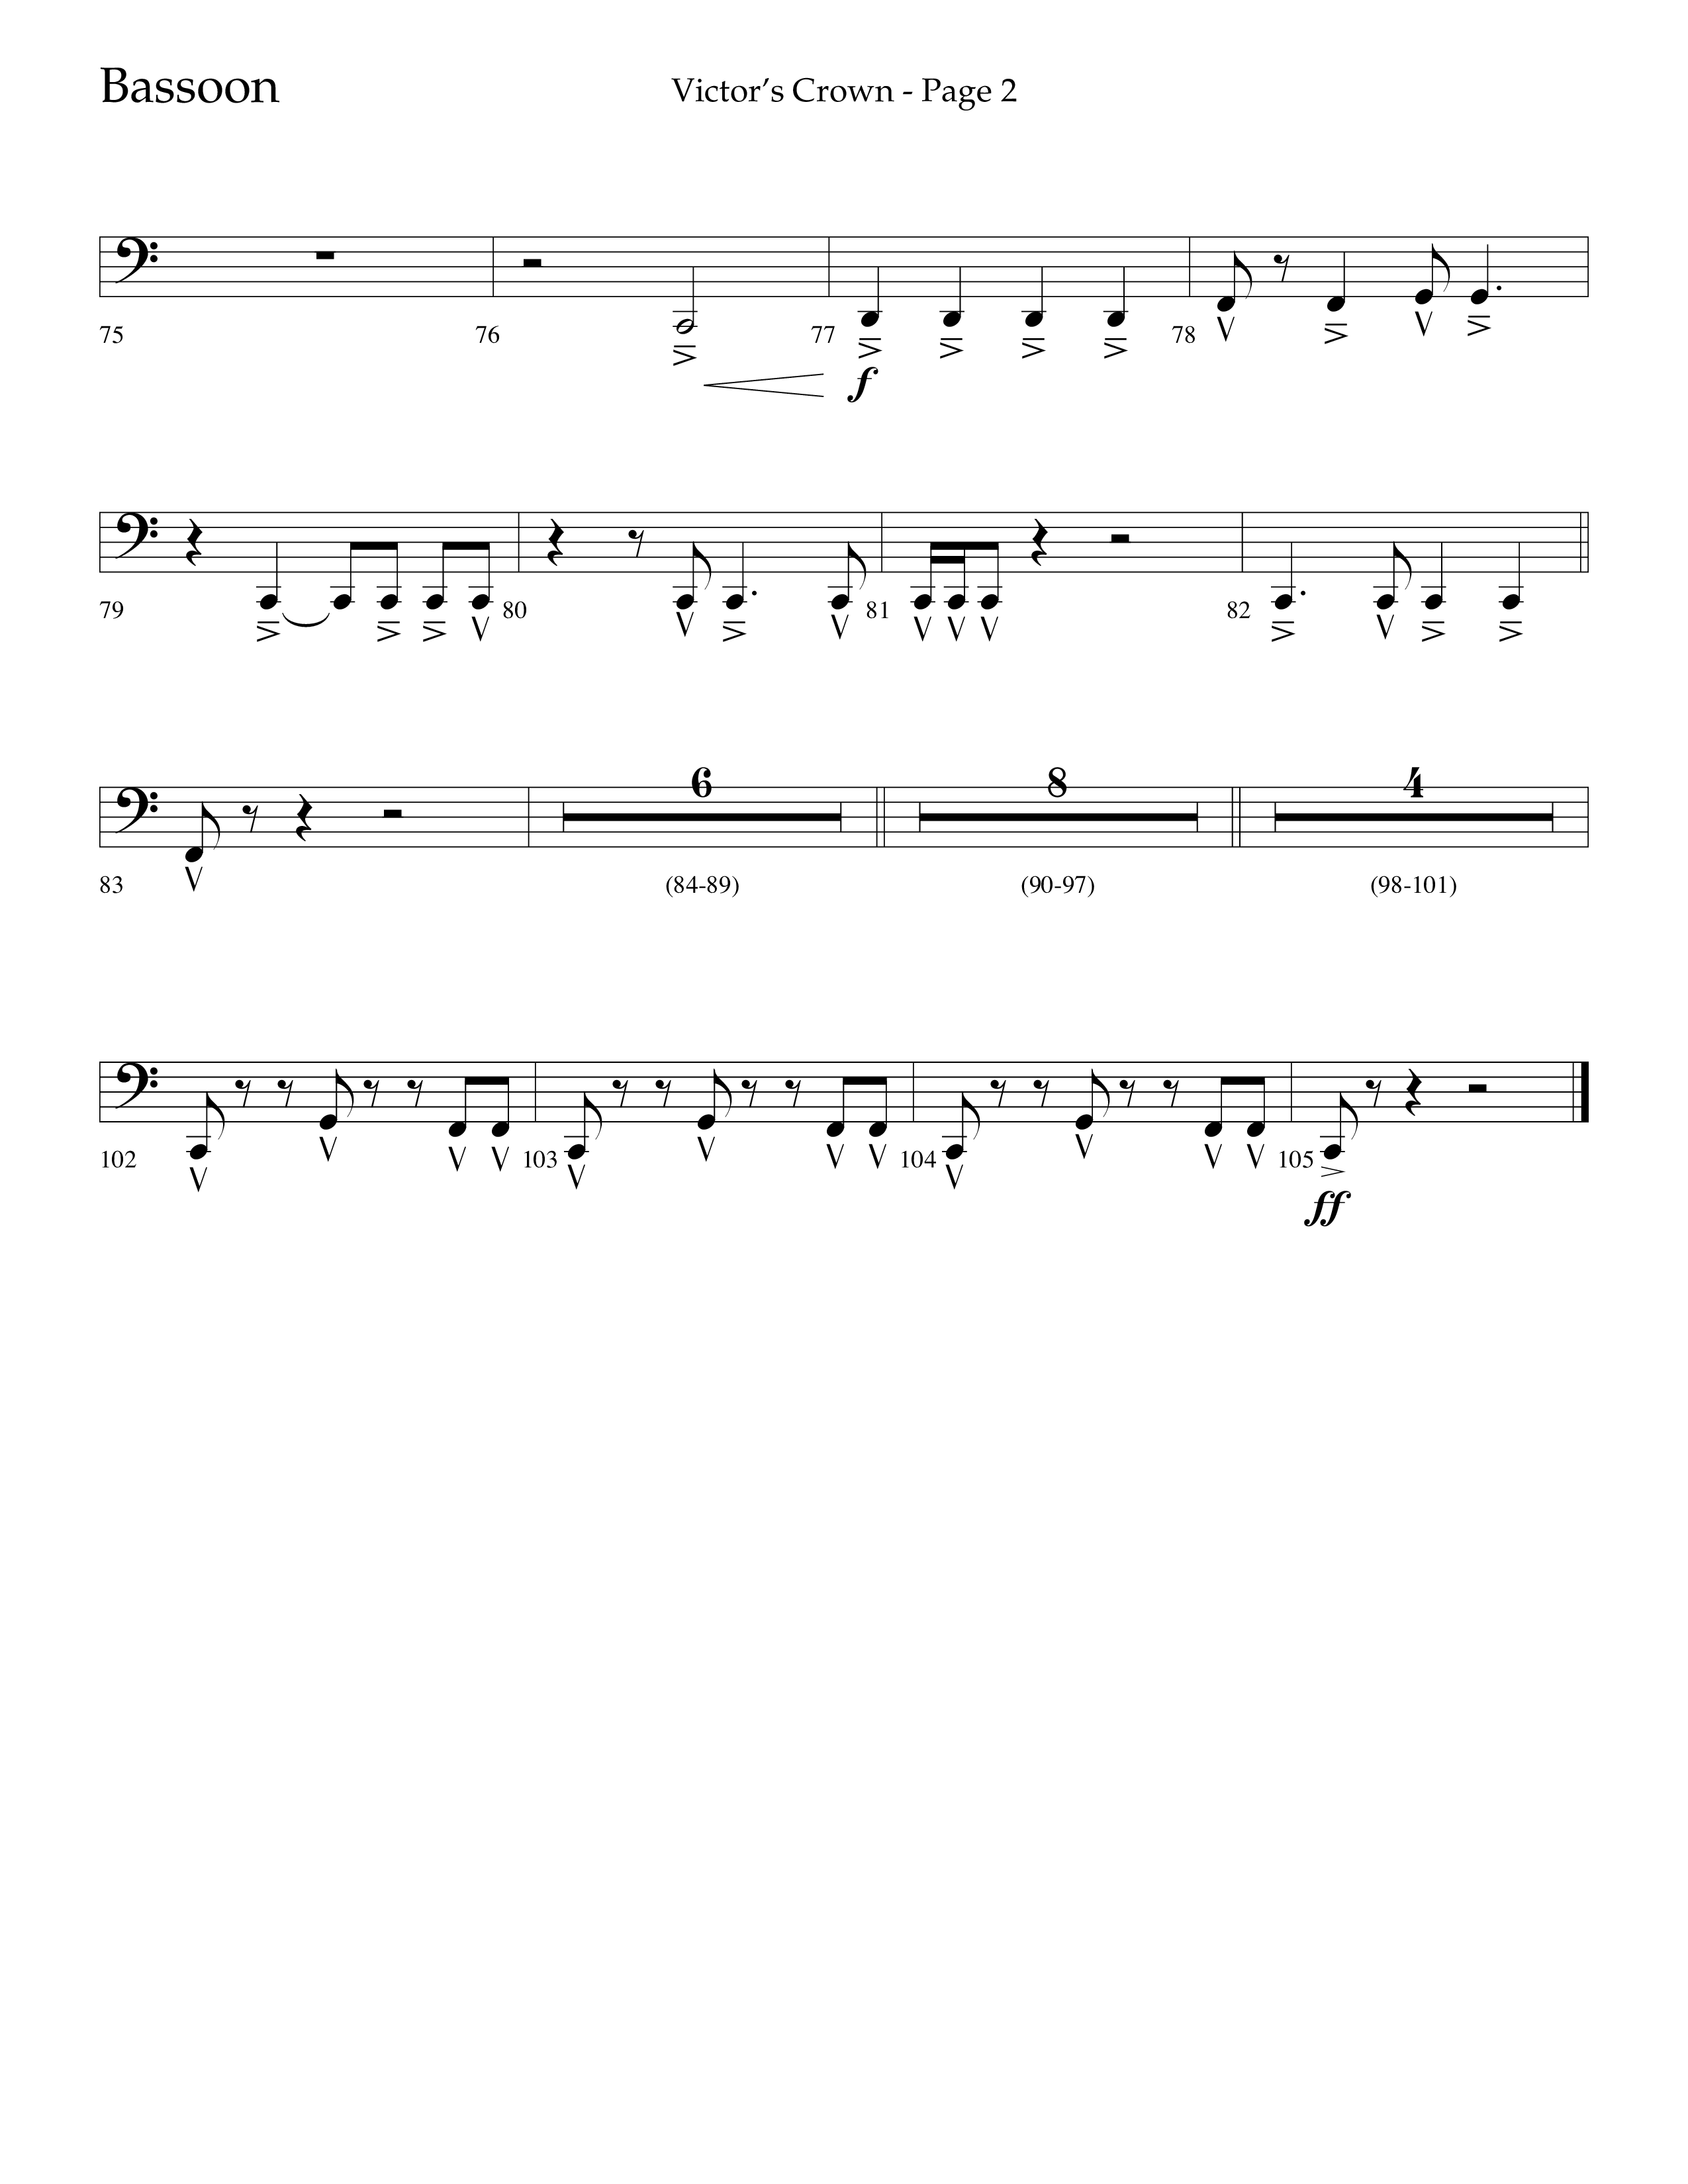 Victor's Crown (Choral Anthem SATB) Bassoon (Lifeway Choral / Arr. David T. Clydesdale)